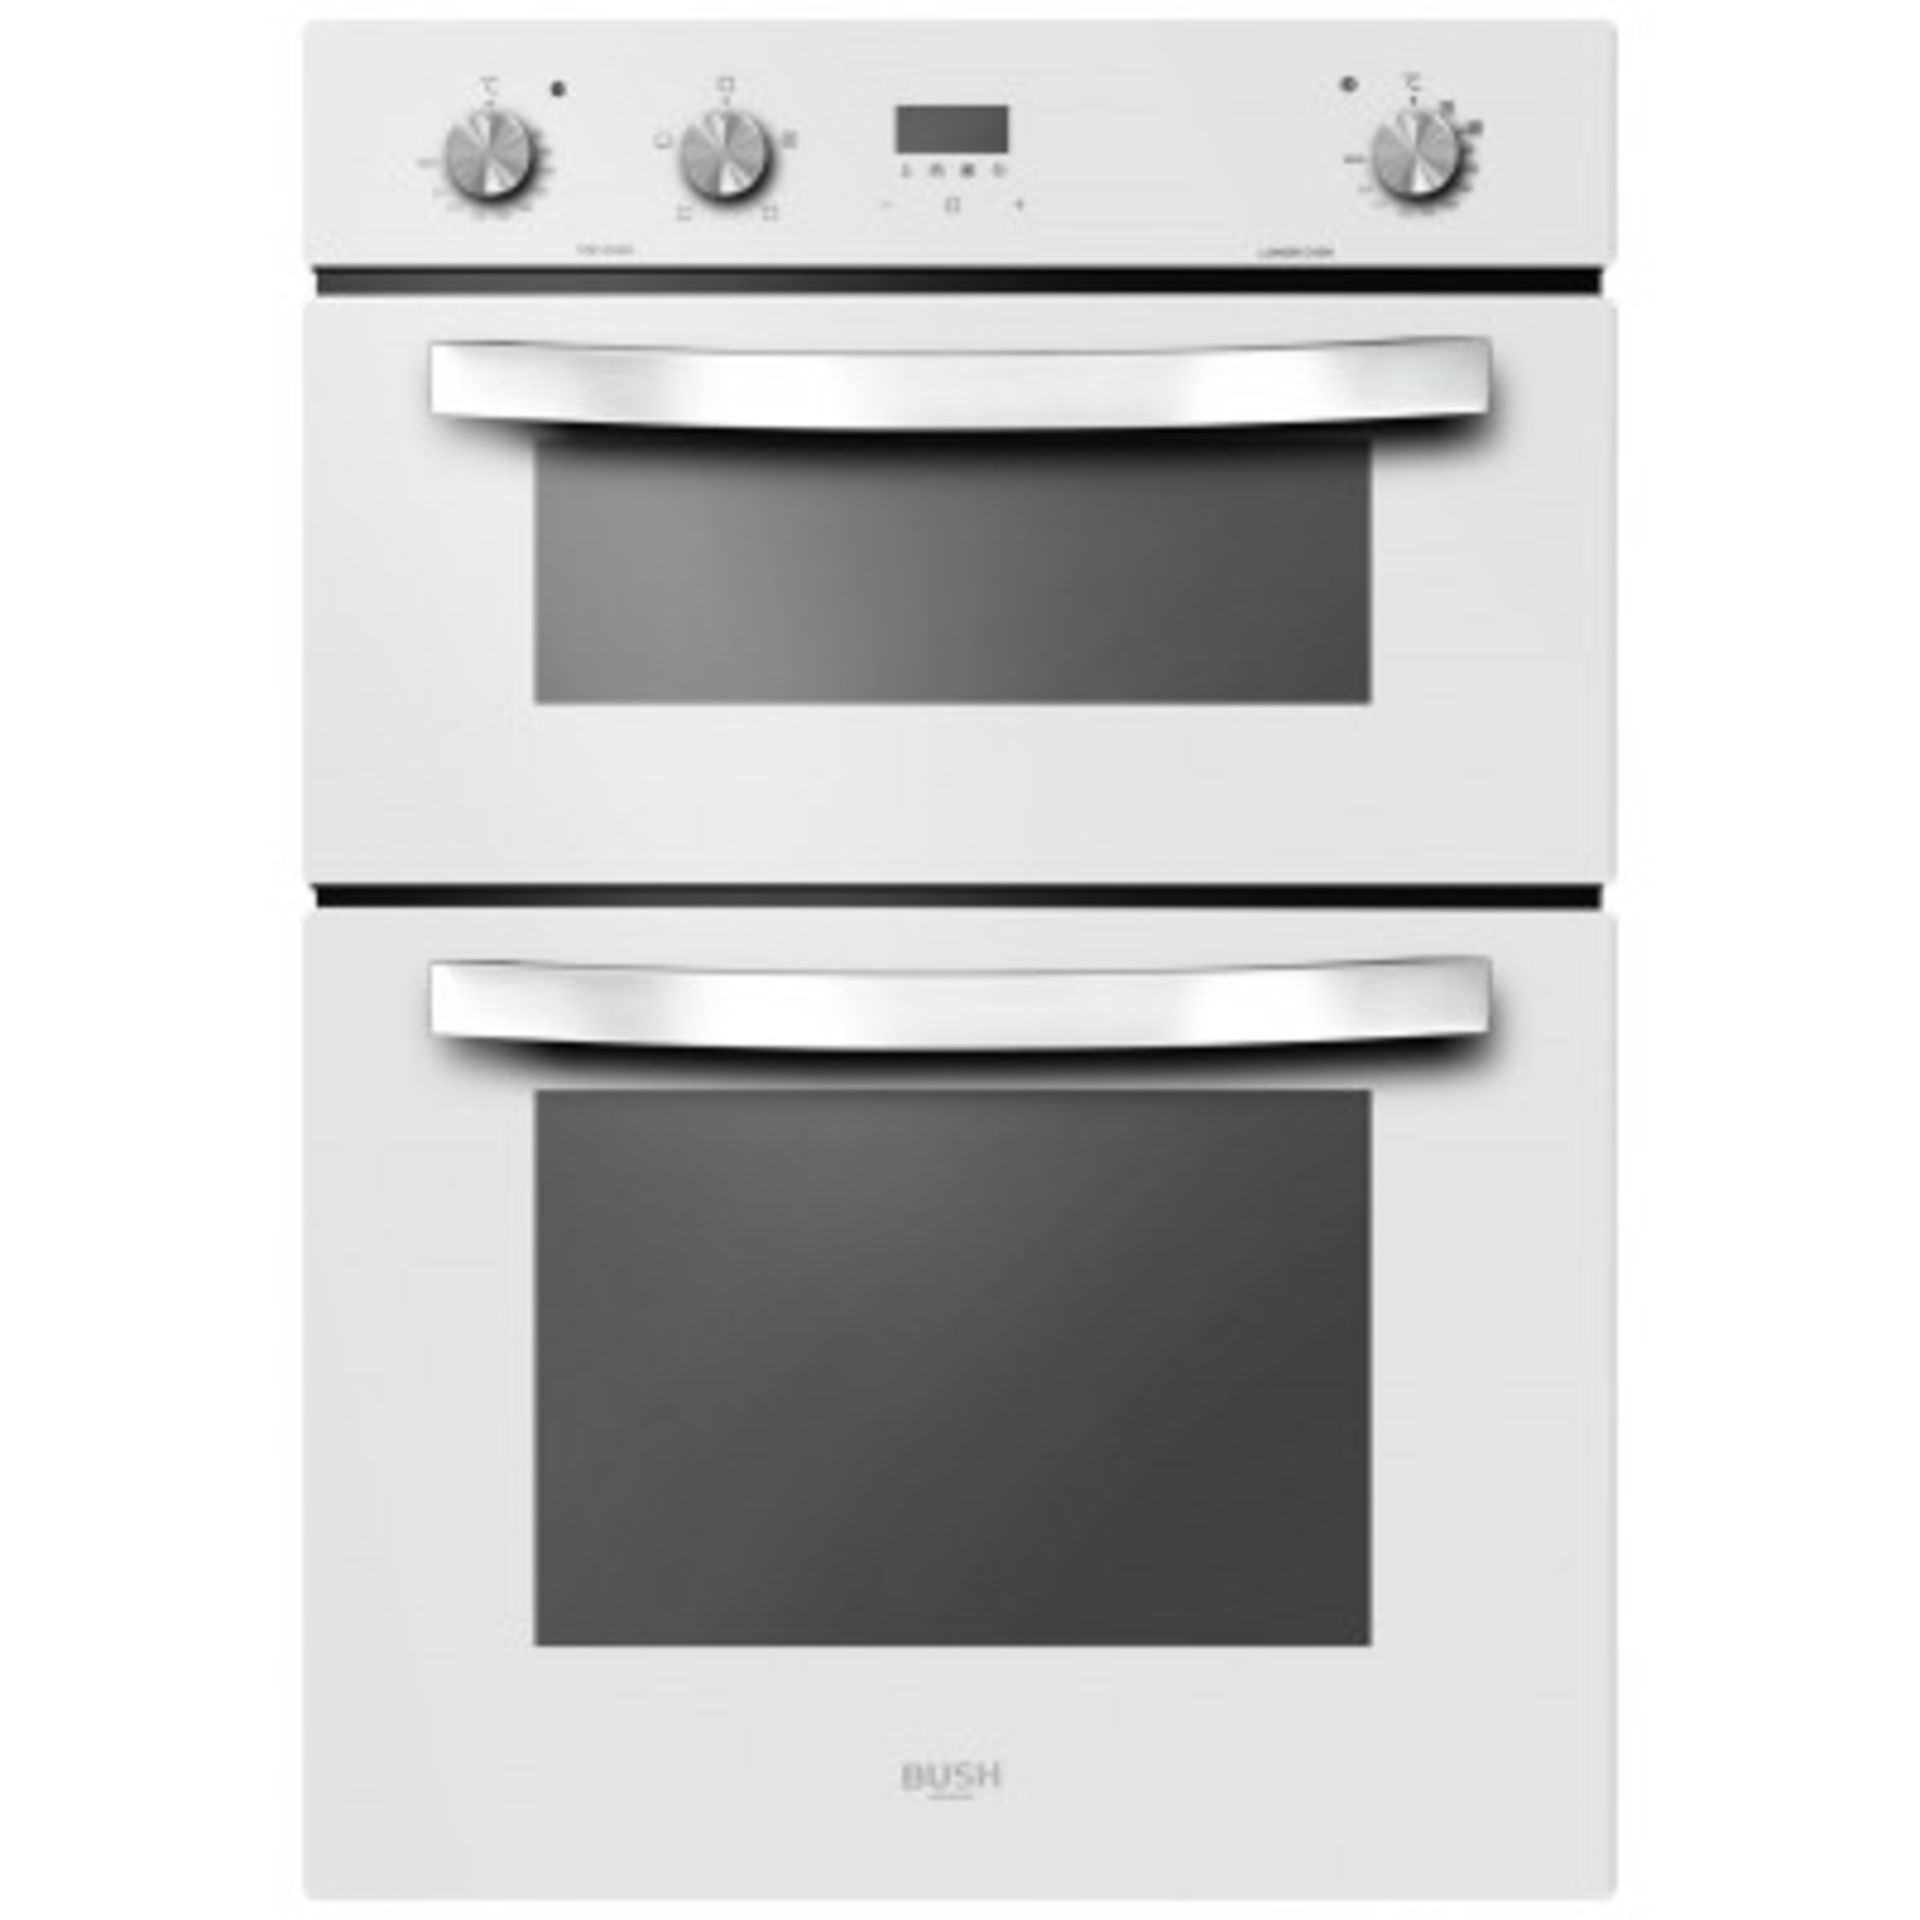 + VAT Grade A/B Bush LSBWDFO Built In Electric Oven - Main Oven Has 57 Litre Capacity - 2nd Oven